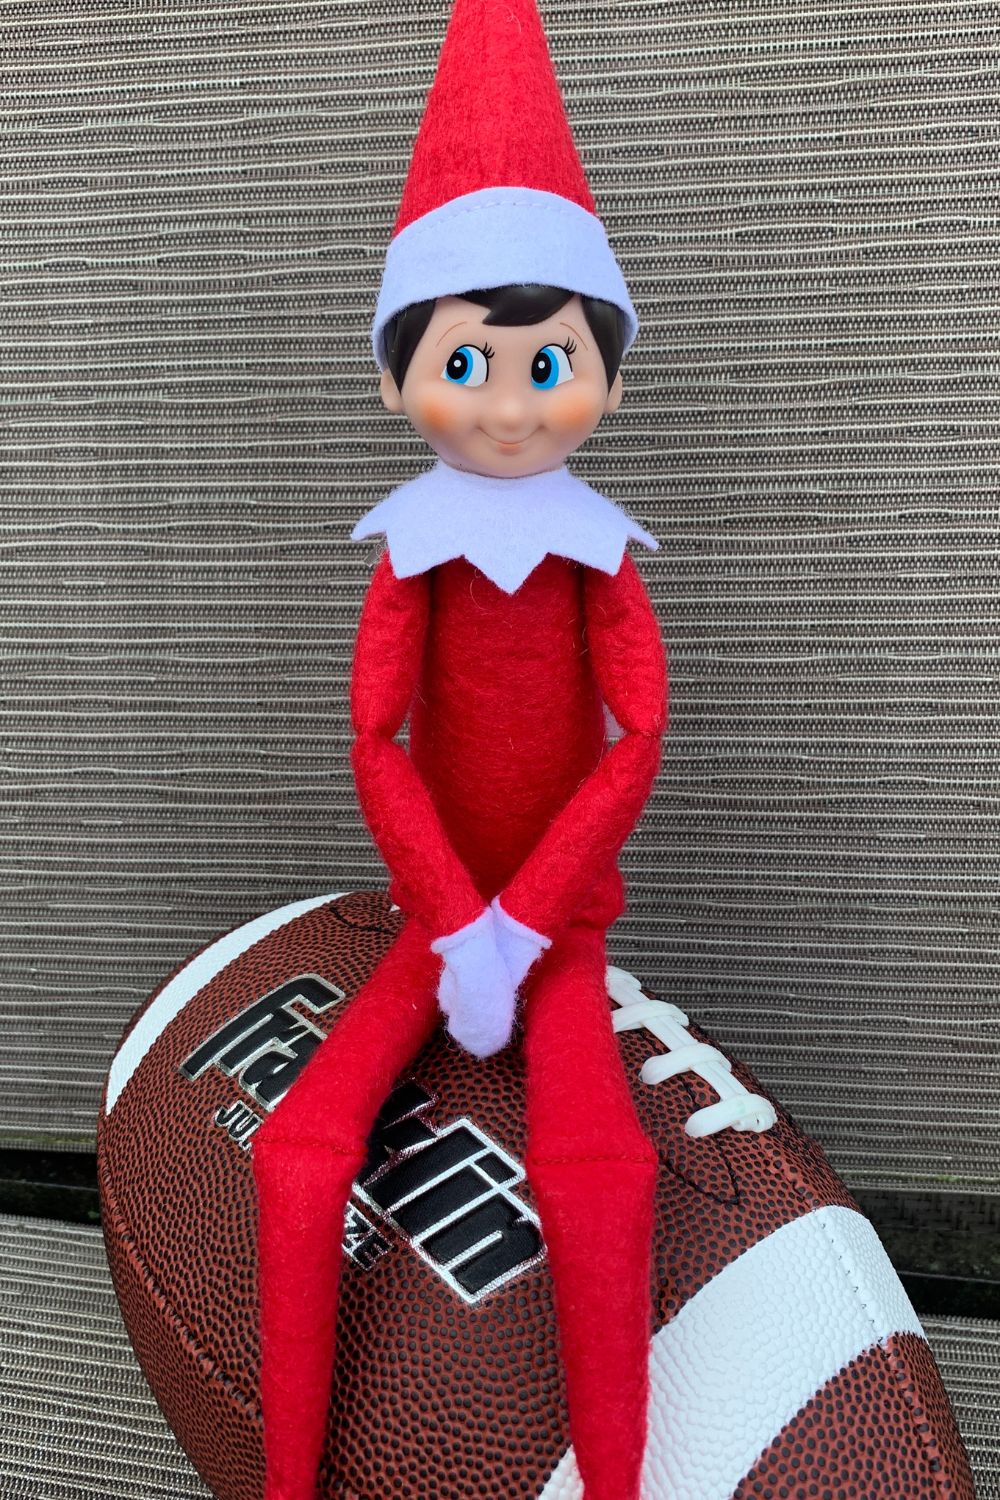 How Does Elf on the Shelf Work for Adults